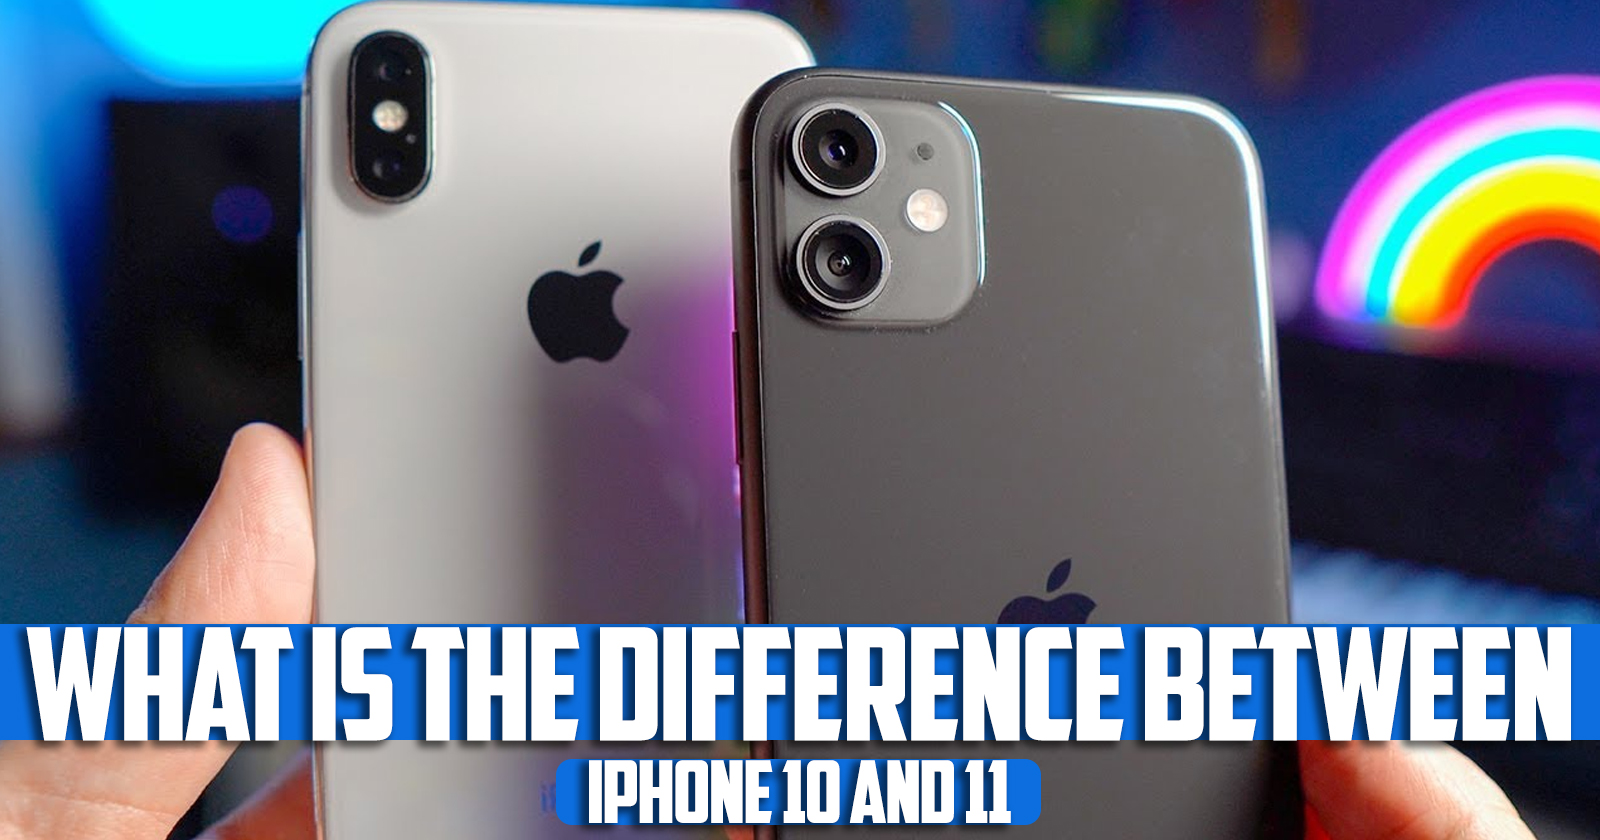 What is the difference between iPhone 10 and 11?